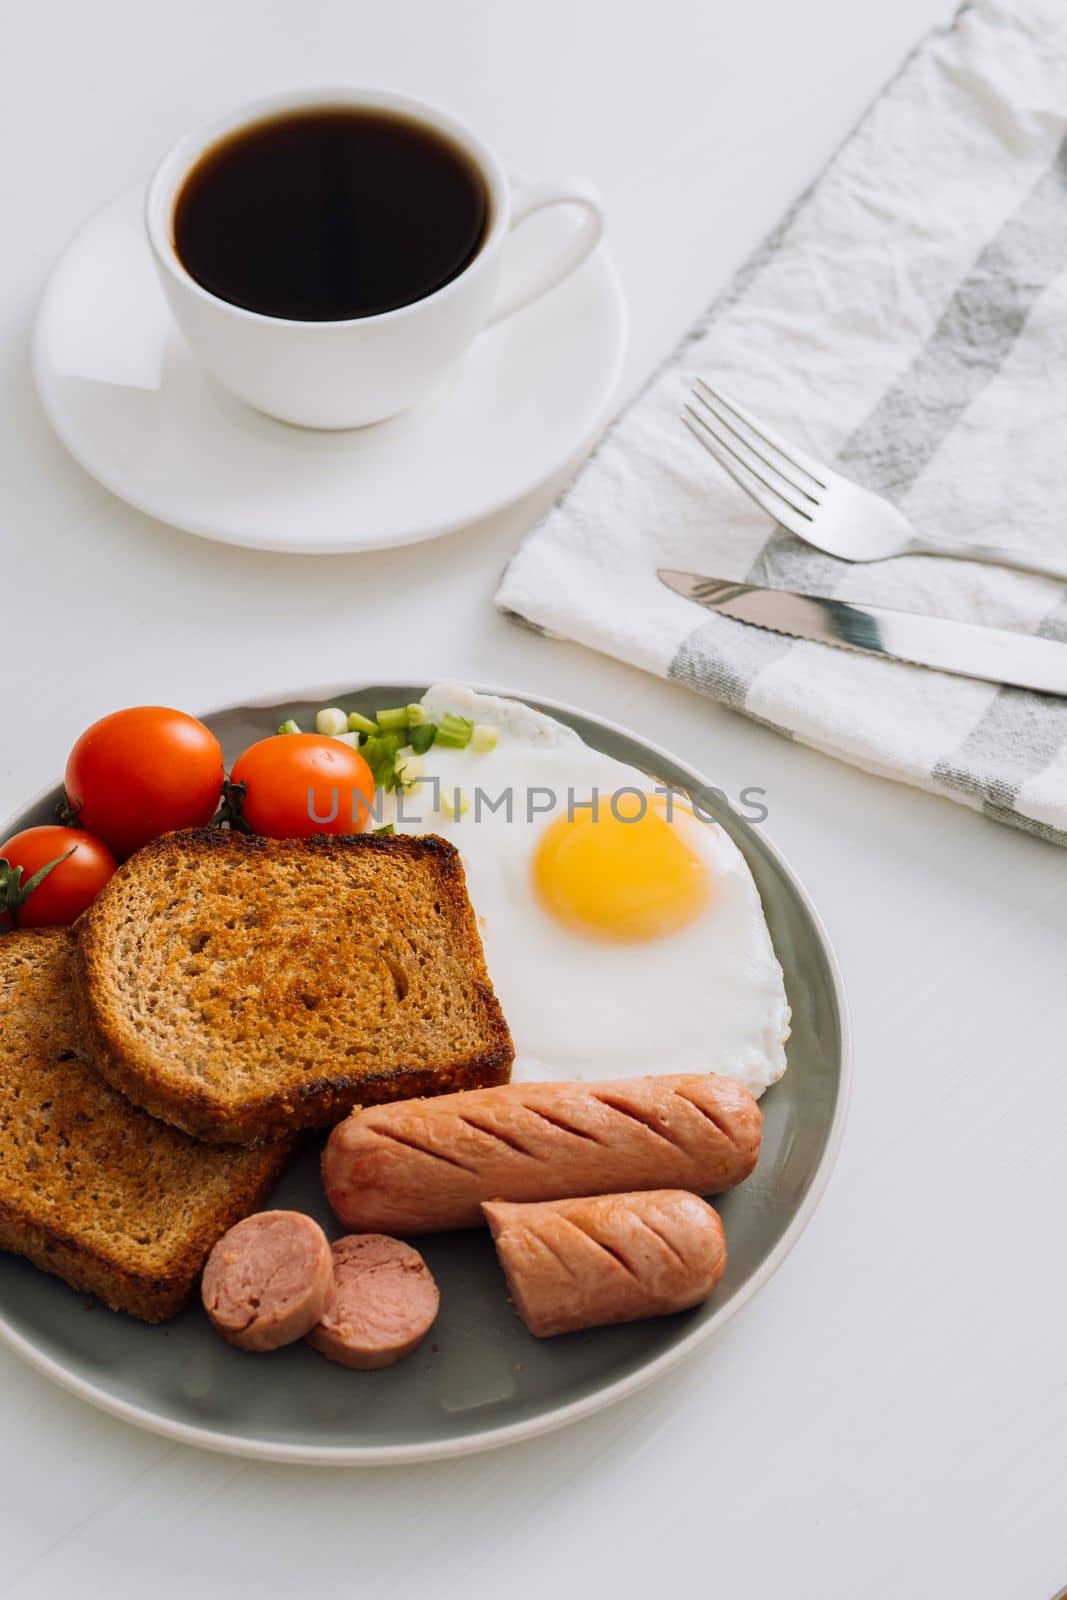 Breakfast plate with cup of black coffee, grilled sausage and whole wheat toast with fried egg and cherry tomatoes on plate